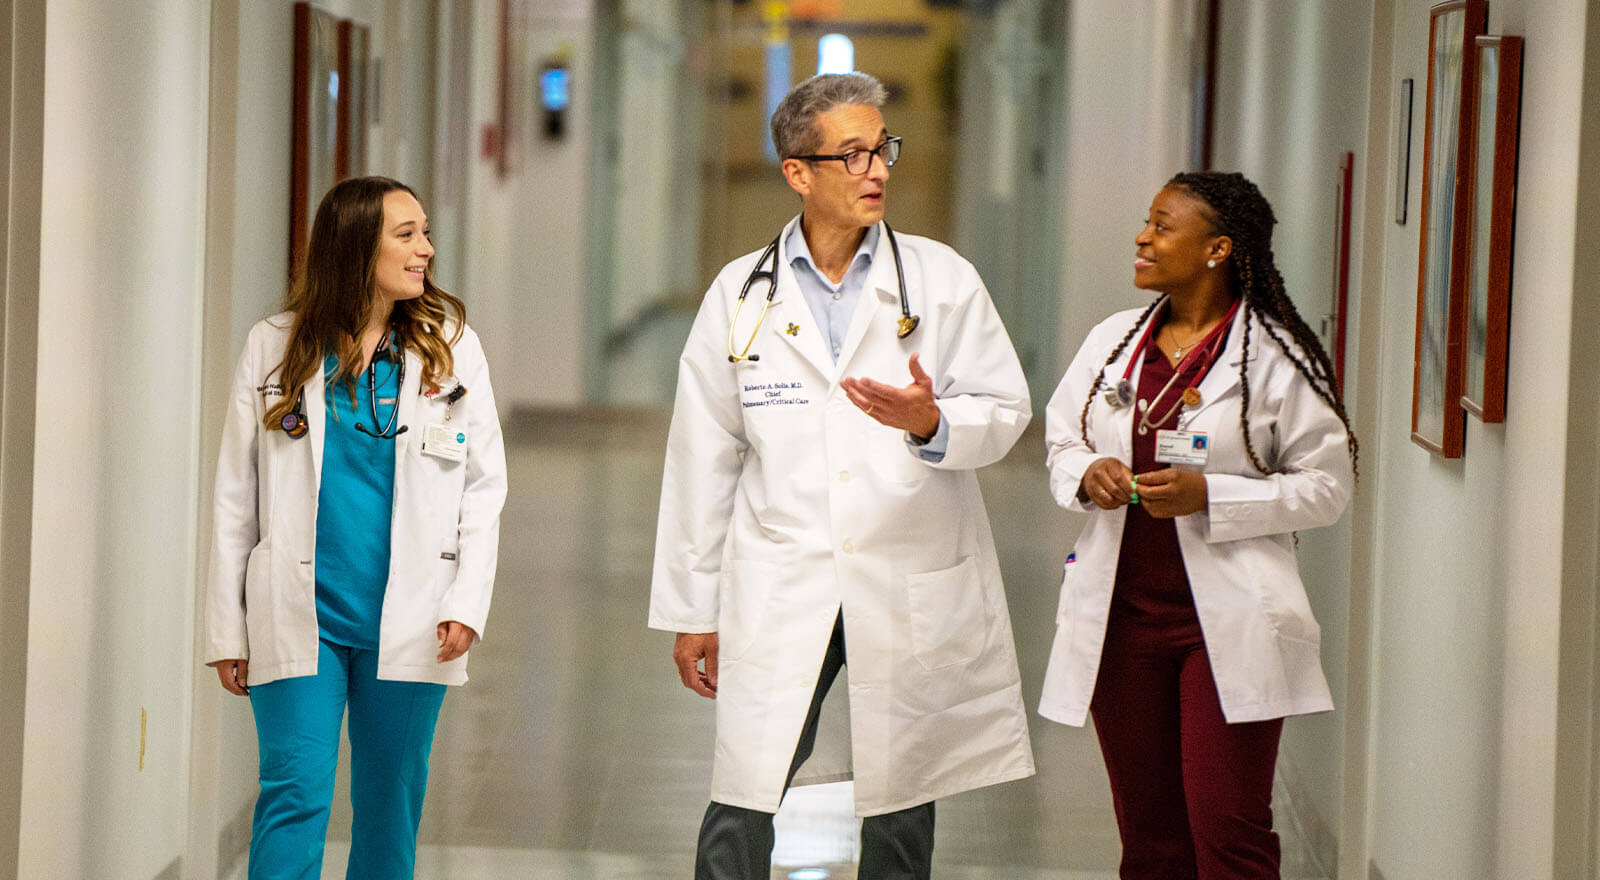 medical residents speaking with physician in hallway